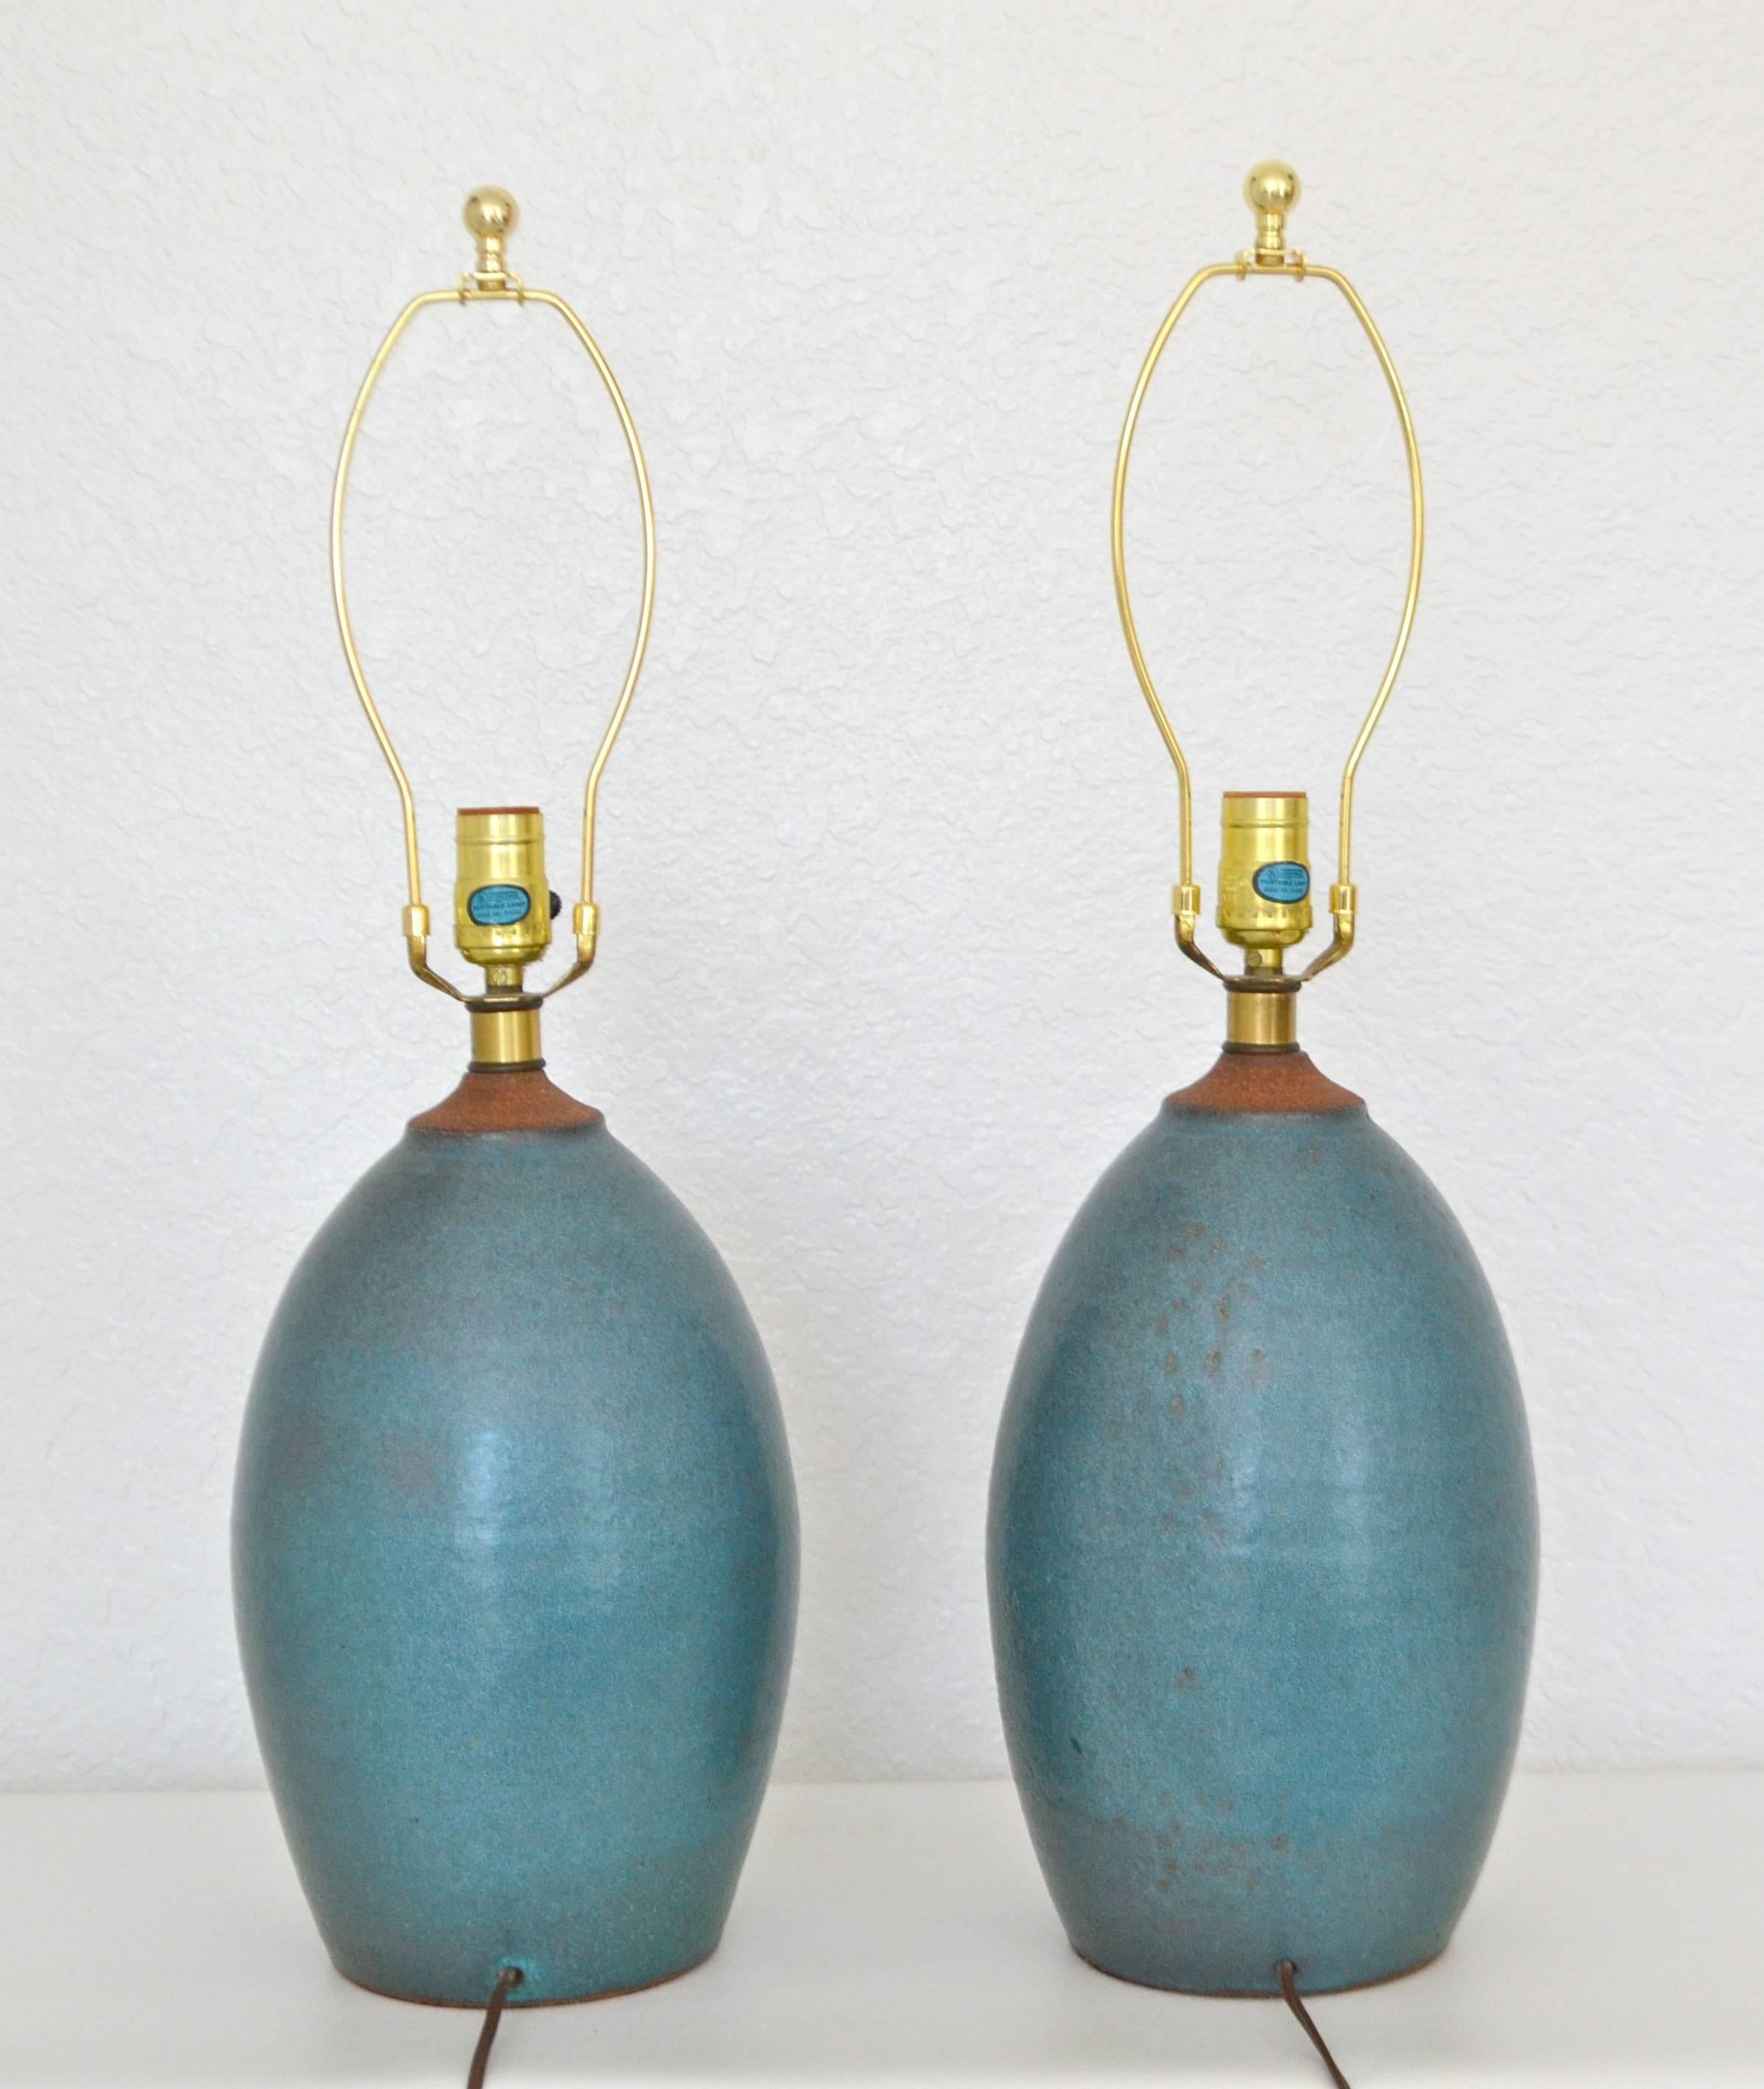 North American Pair of Mid-Century Matte Blue Glazed Ceramic Organic Form Table Lamps